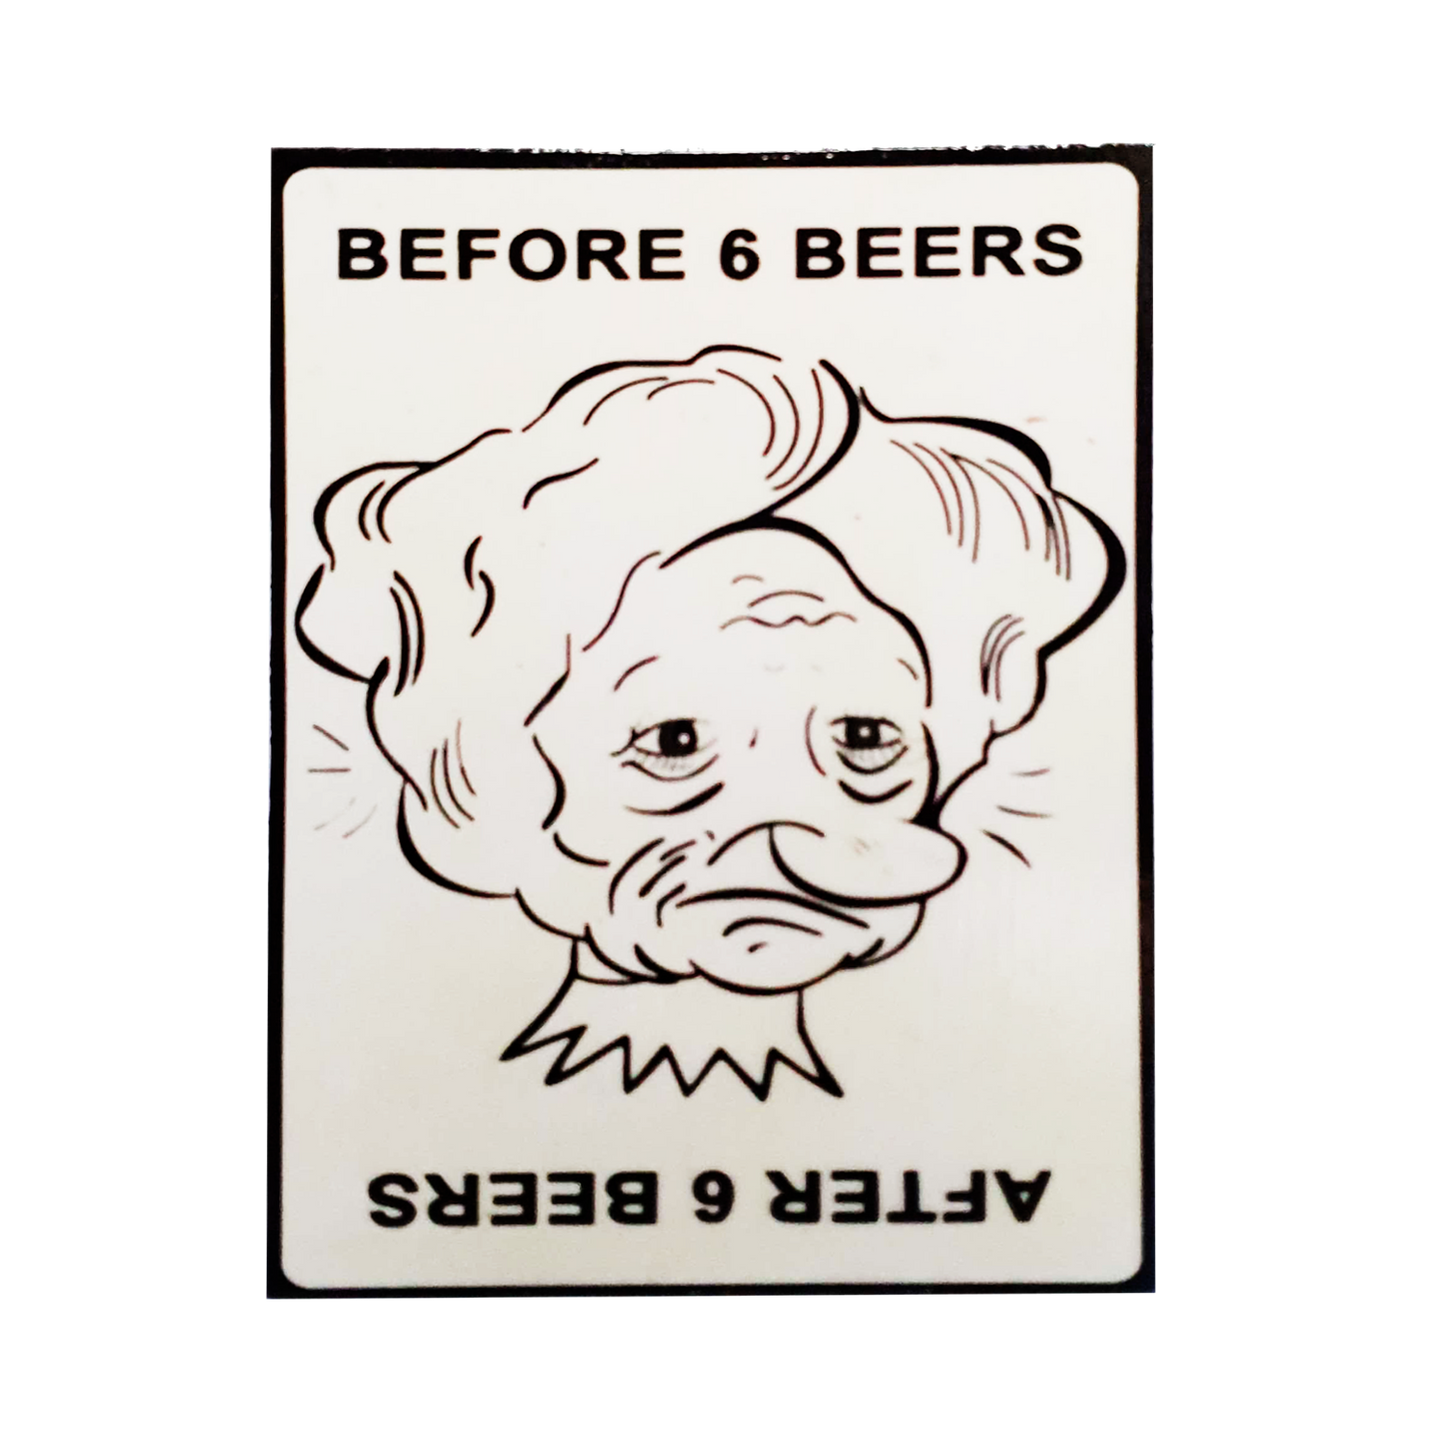 Afiche "Before 6 beers"